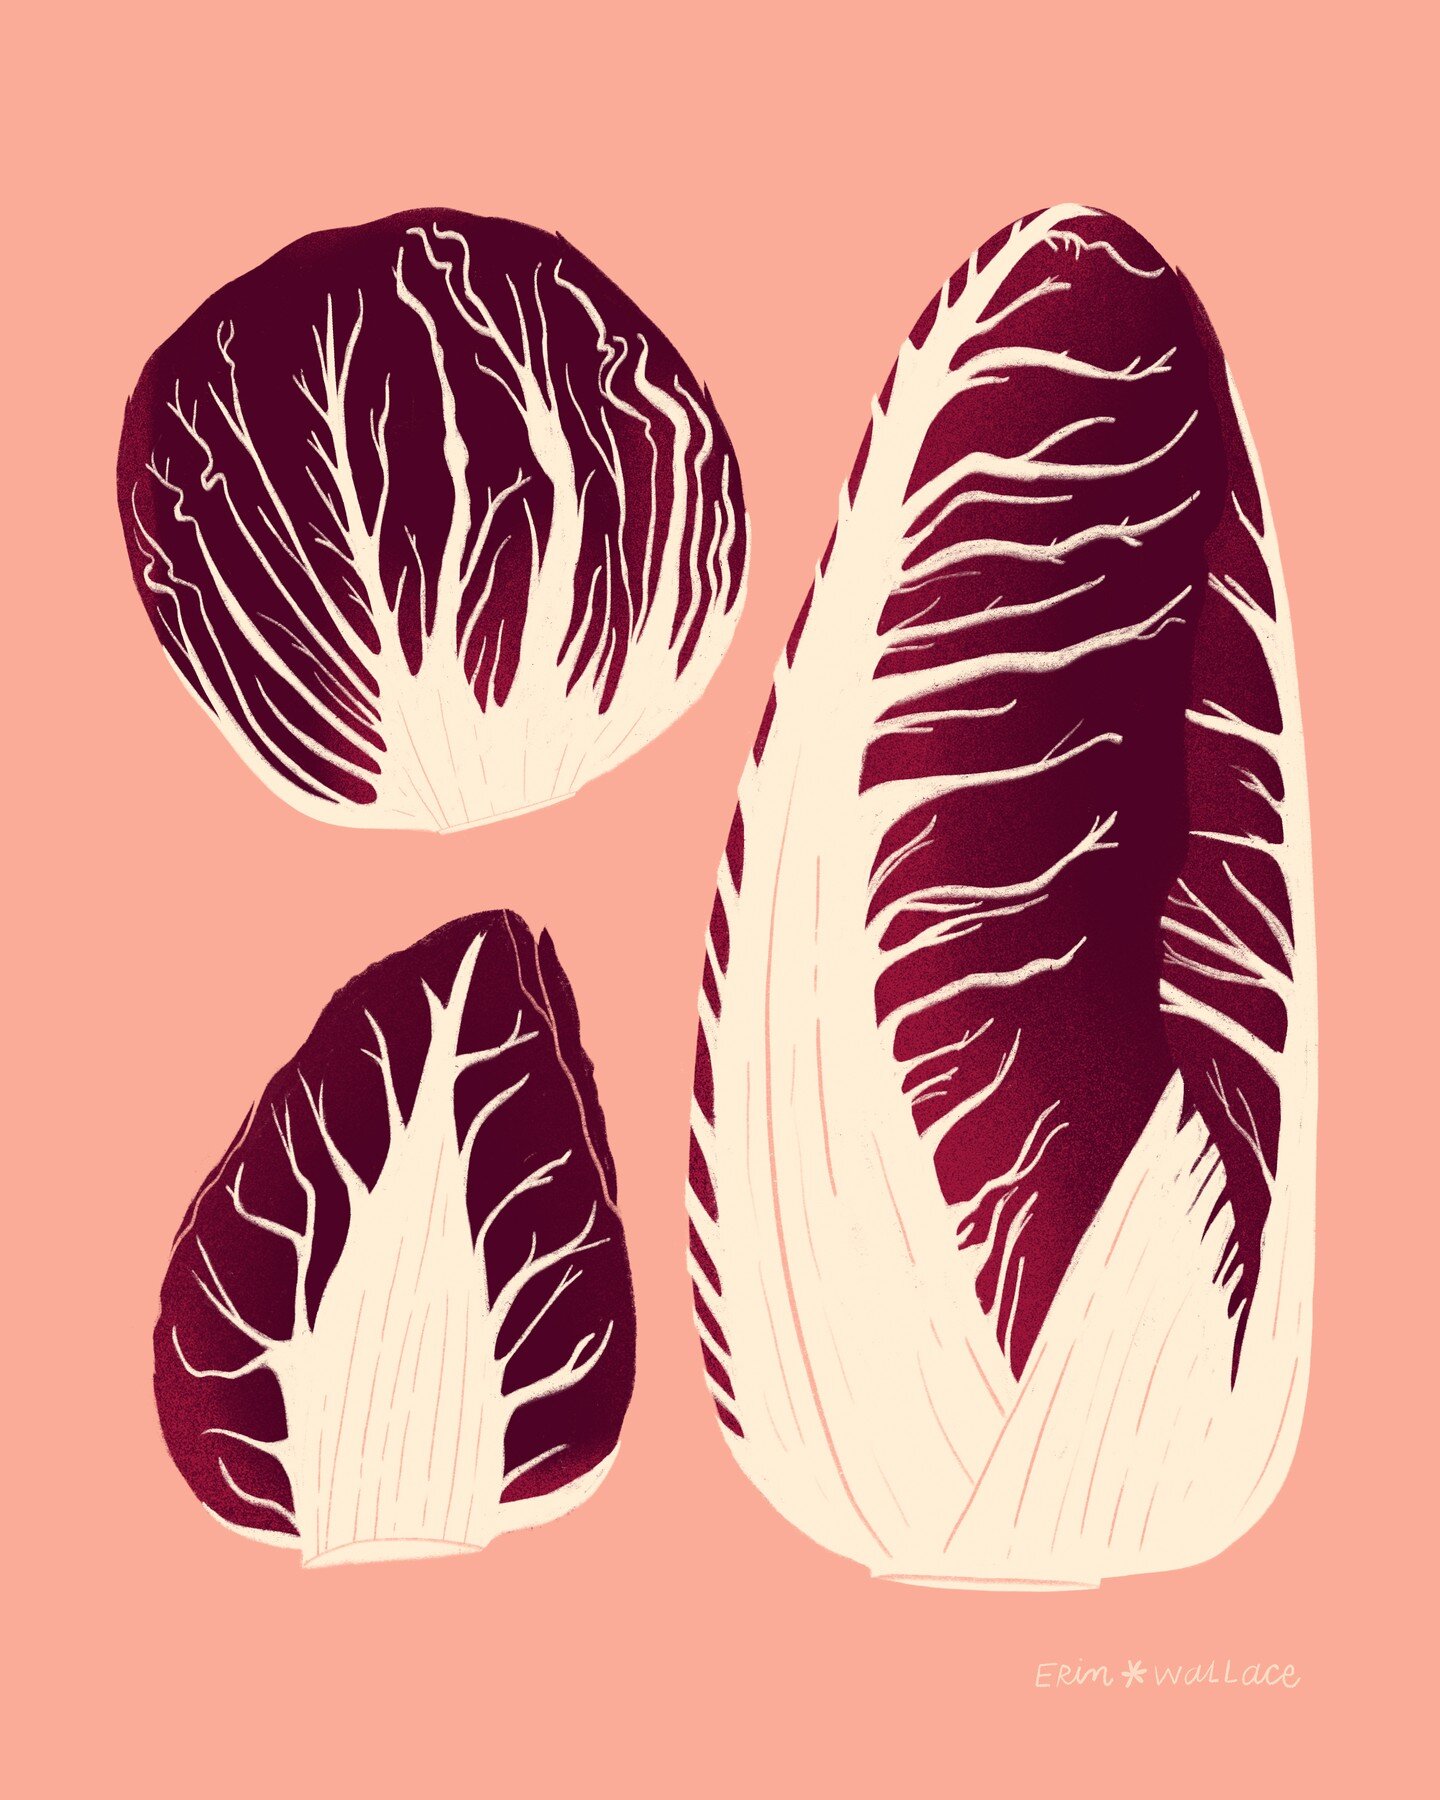 Always dreaming about radicchio.&nbsp;💜

Still in the midst of my shop reset! 25% off with code SUMMER! Thanks to everyone who's made a purchase in the last week!

#theydrawandcook #erindrawsfood #foodillustration #radicchio #chicory